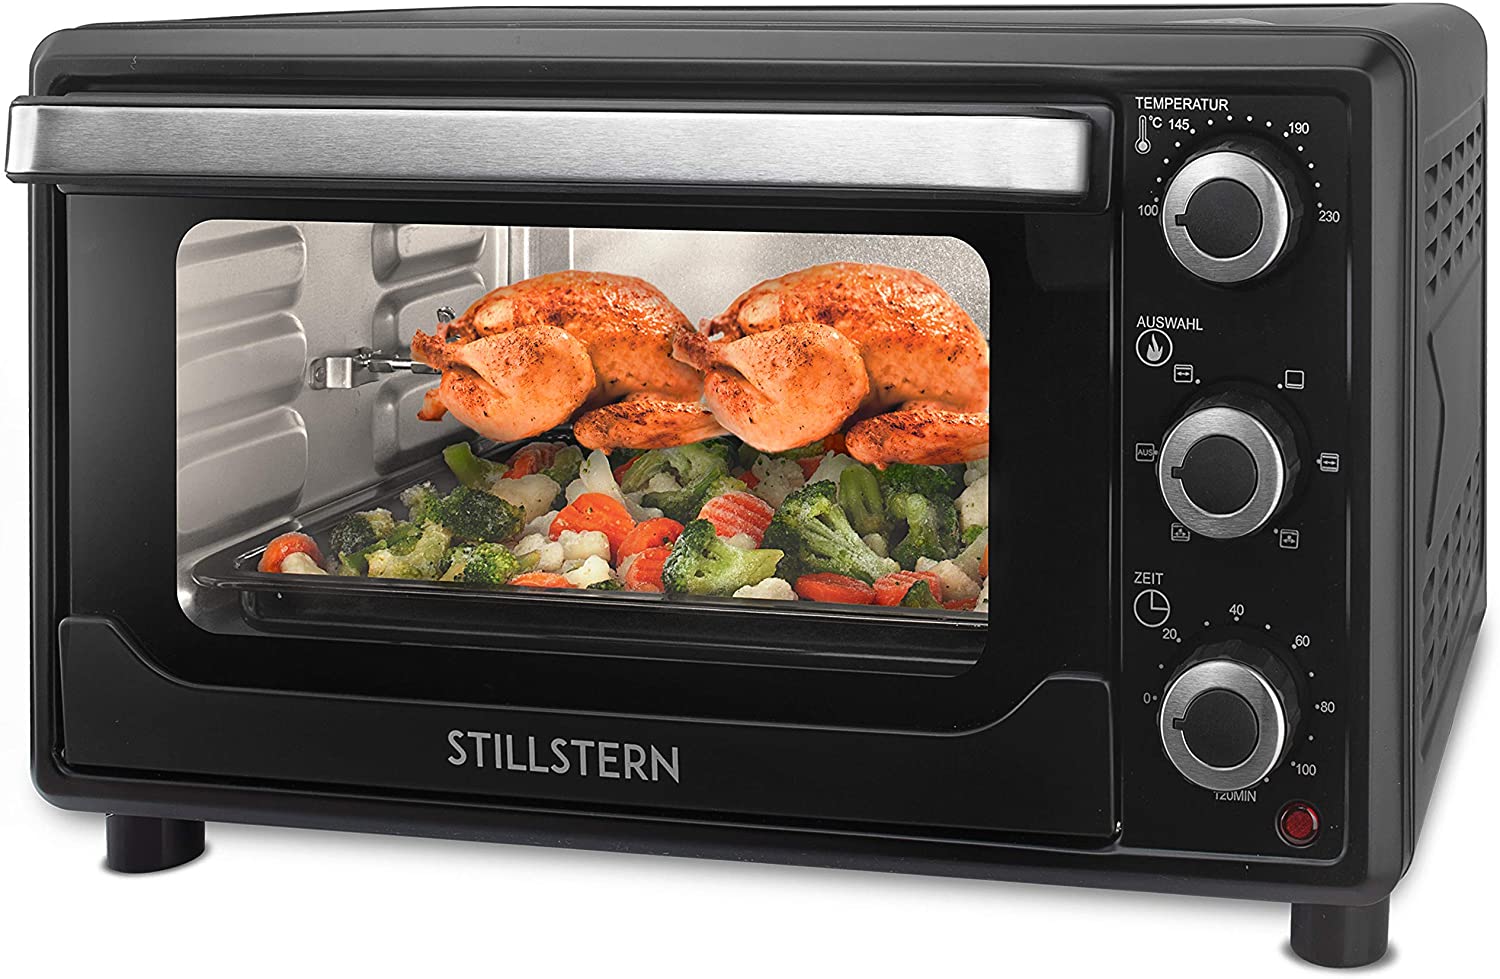 Stillstern Mini Oven with Circulation (25 L) German Version, 2 x Baking Tray, Oven Gloves, Recipe Booklet, Rotisser, Timer, Interior Lighting, 1500 W, Toaster Grill Pizza Oven Mini Oven Ideal for Camping